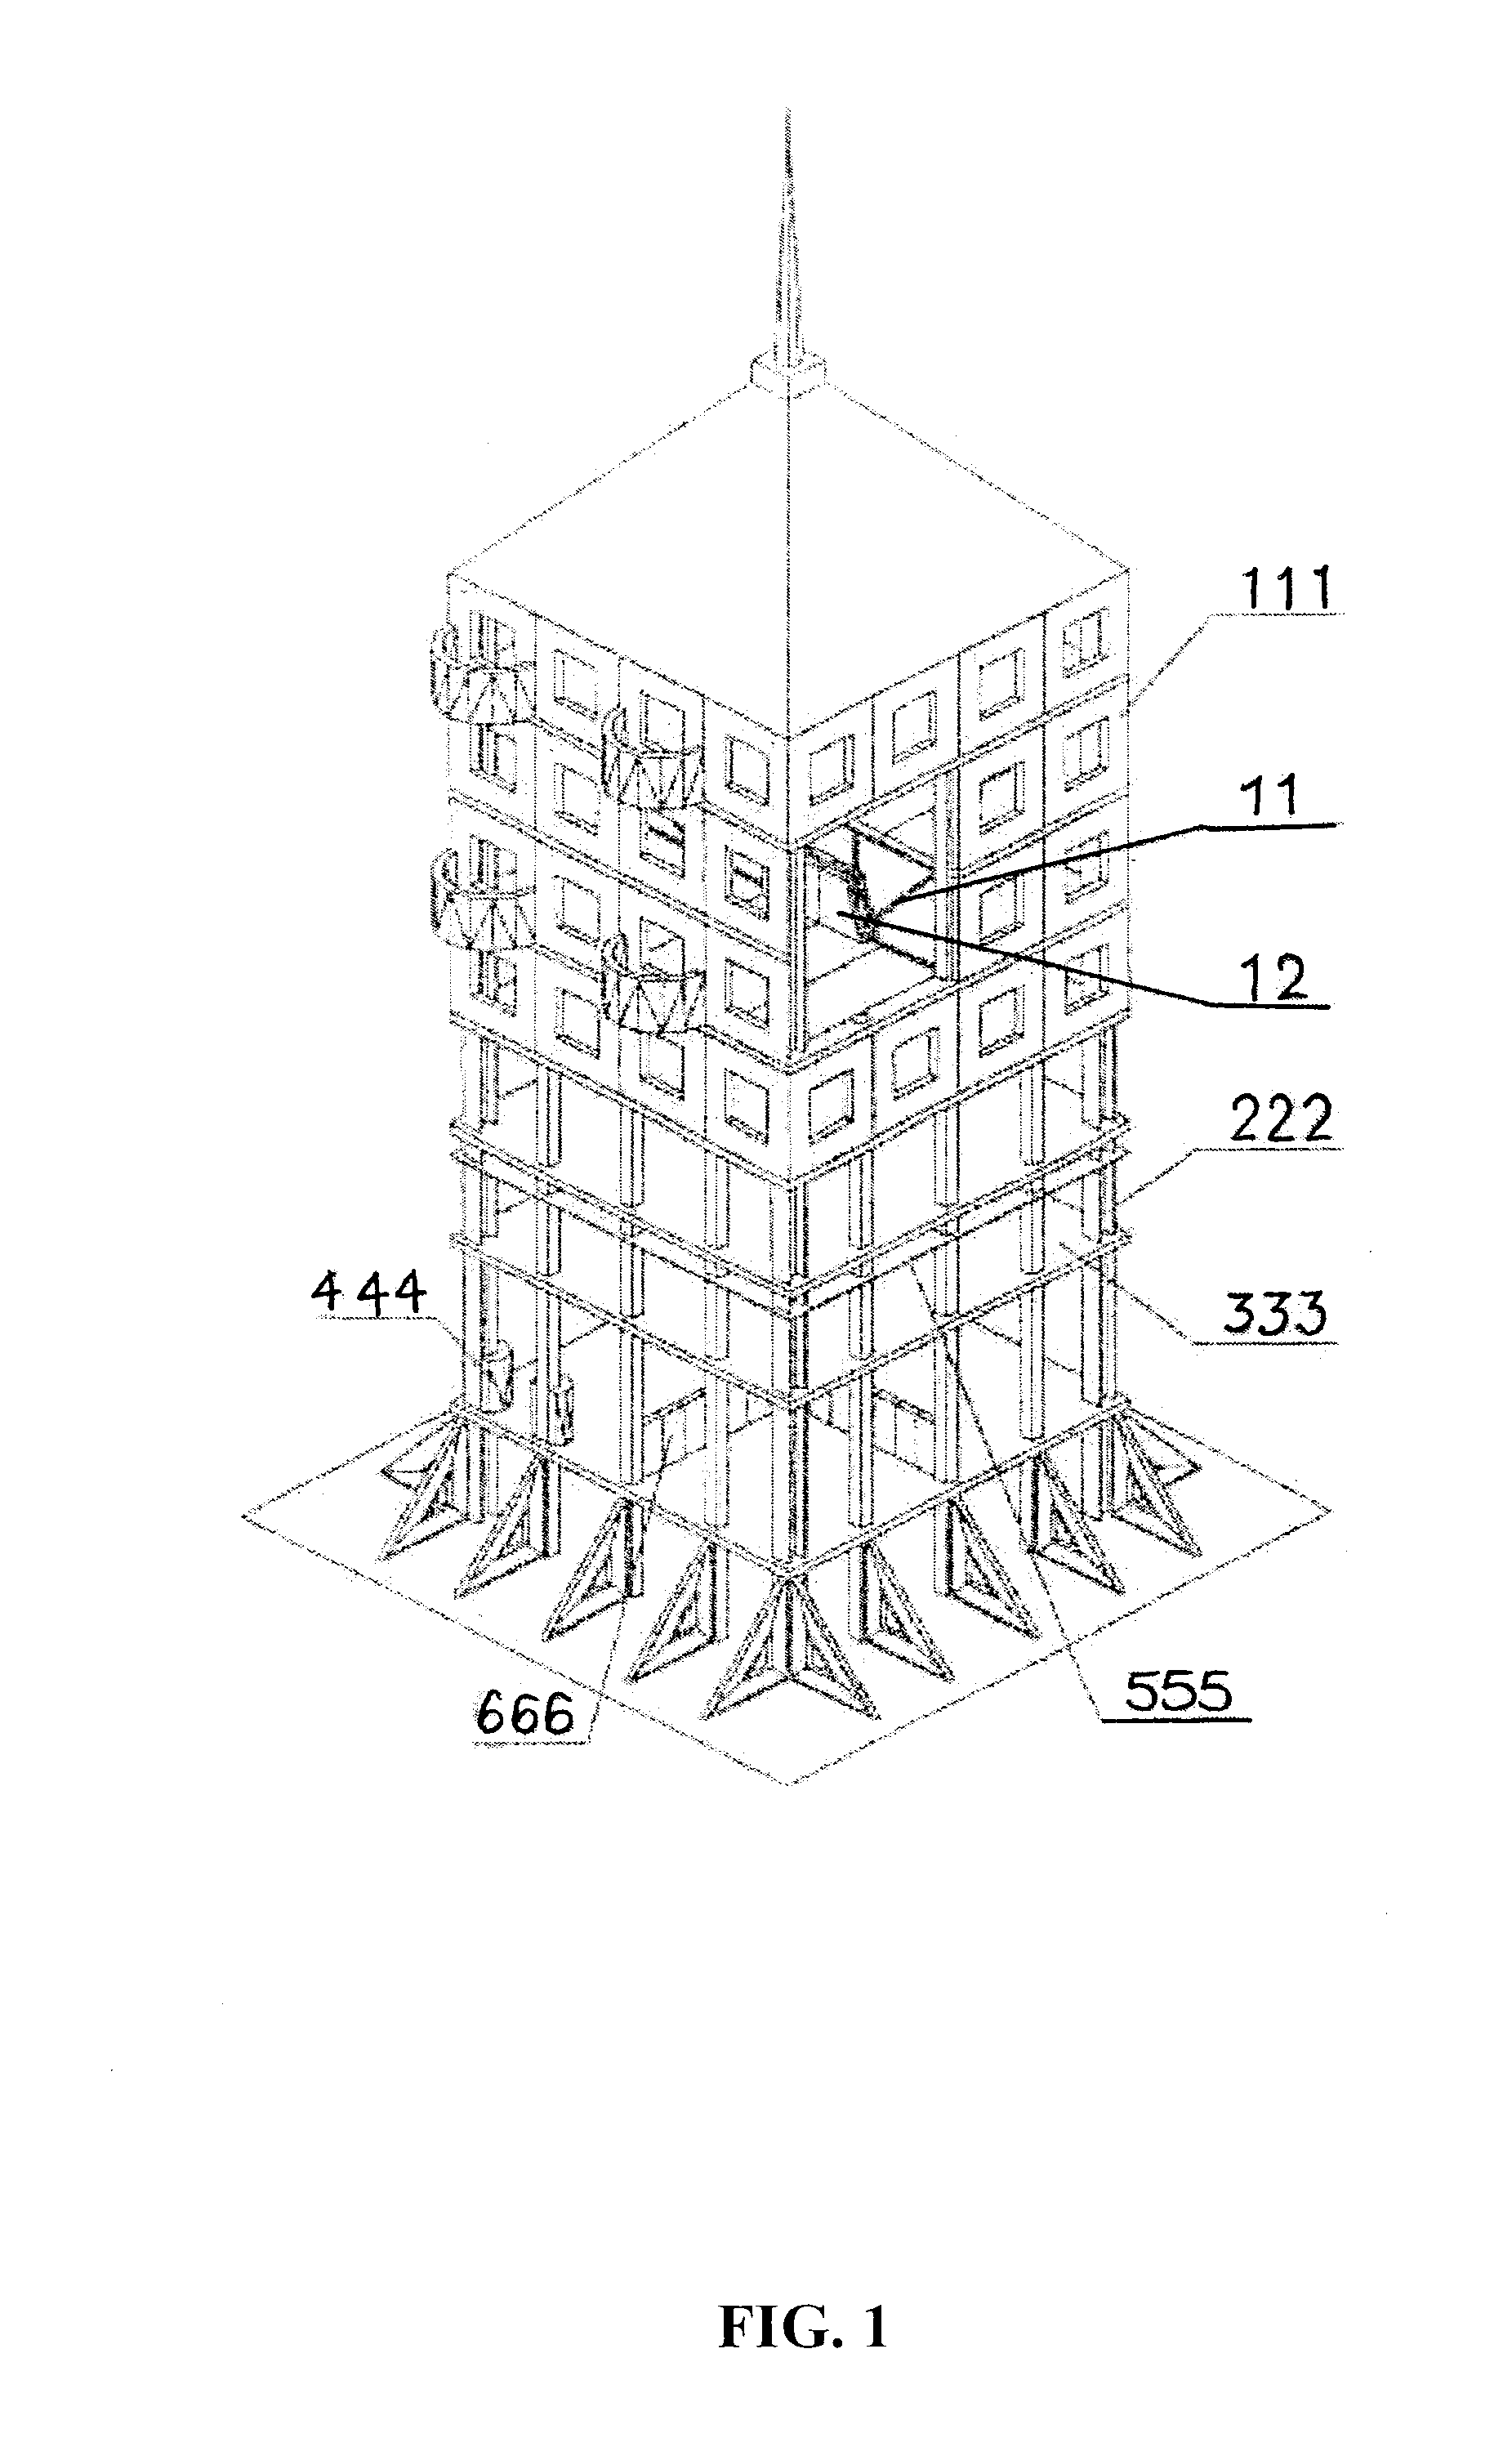 Structure formed of foaming cement and lightweight steel, and a structure system and method of forming the structure system